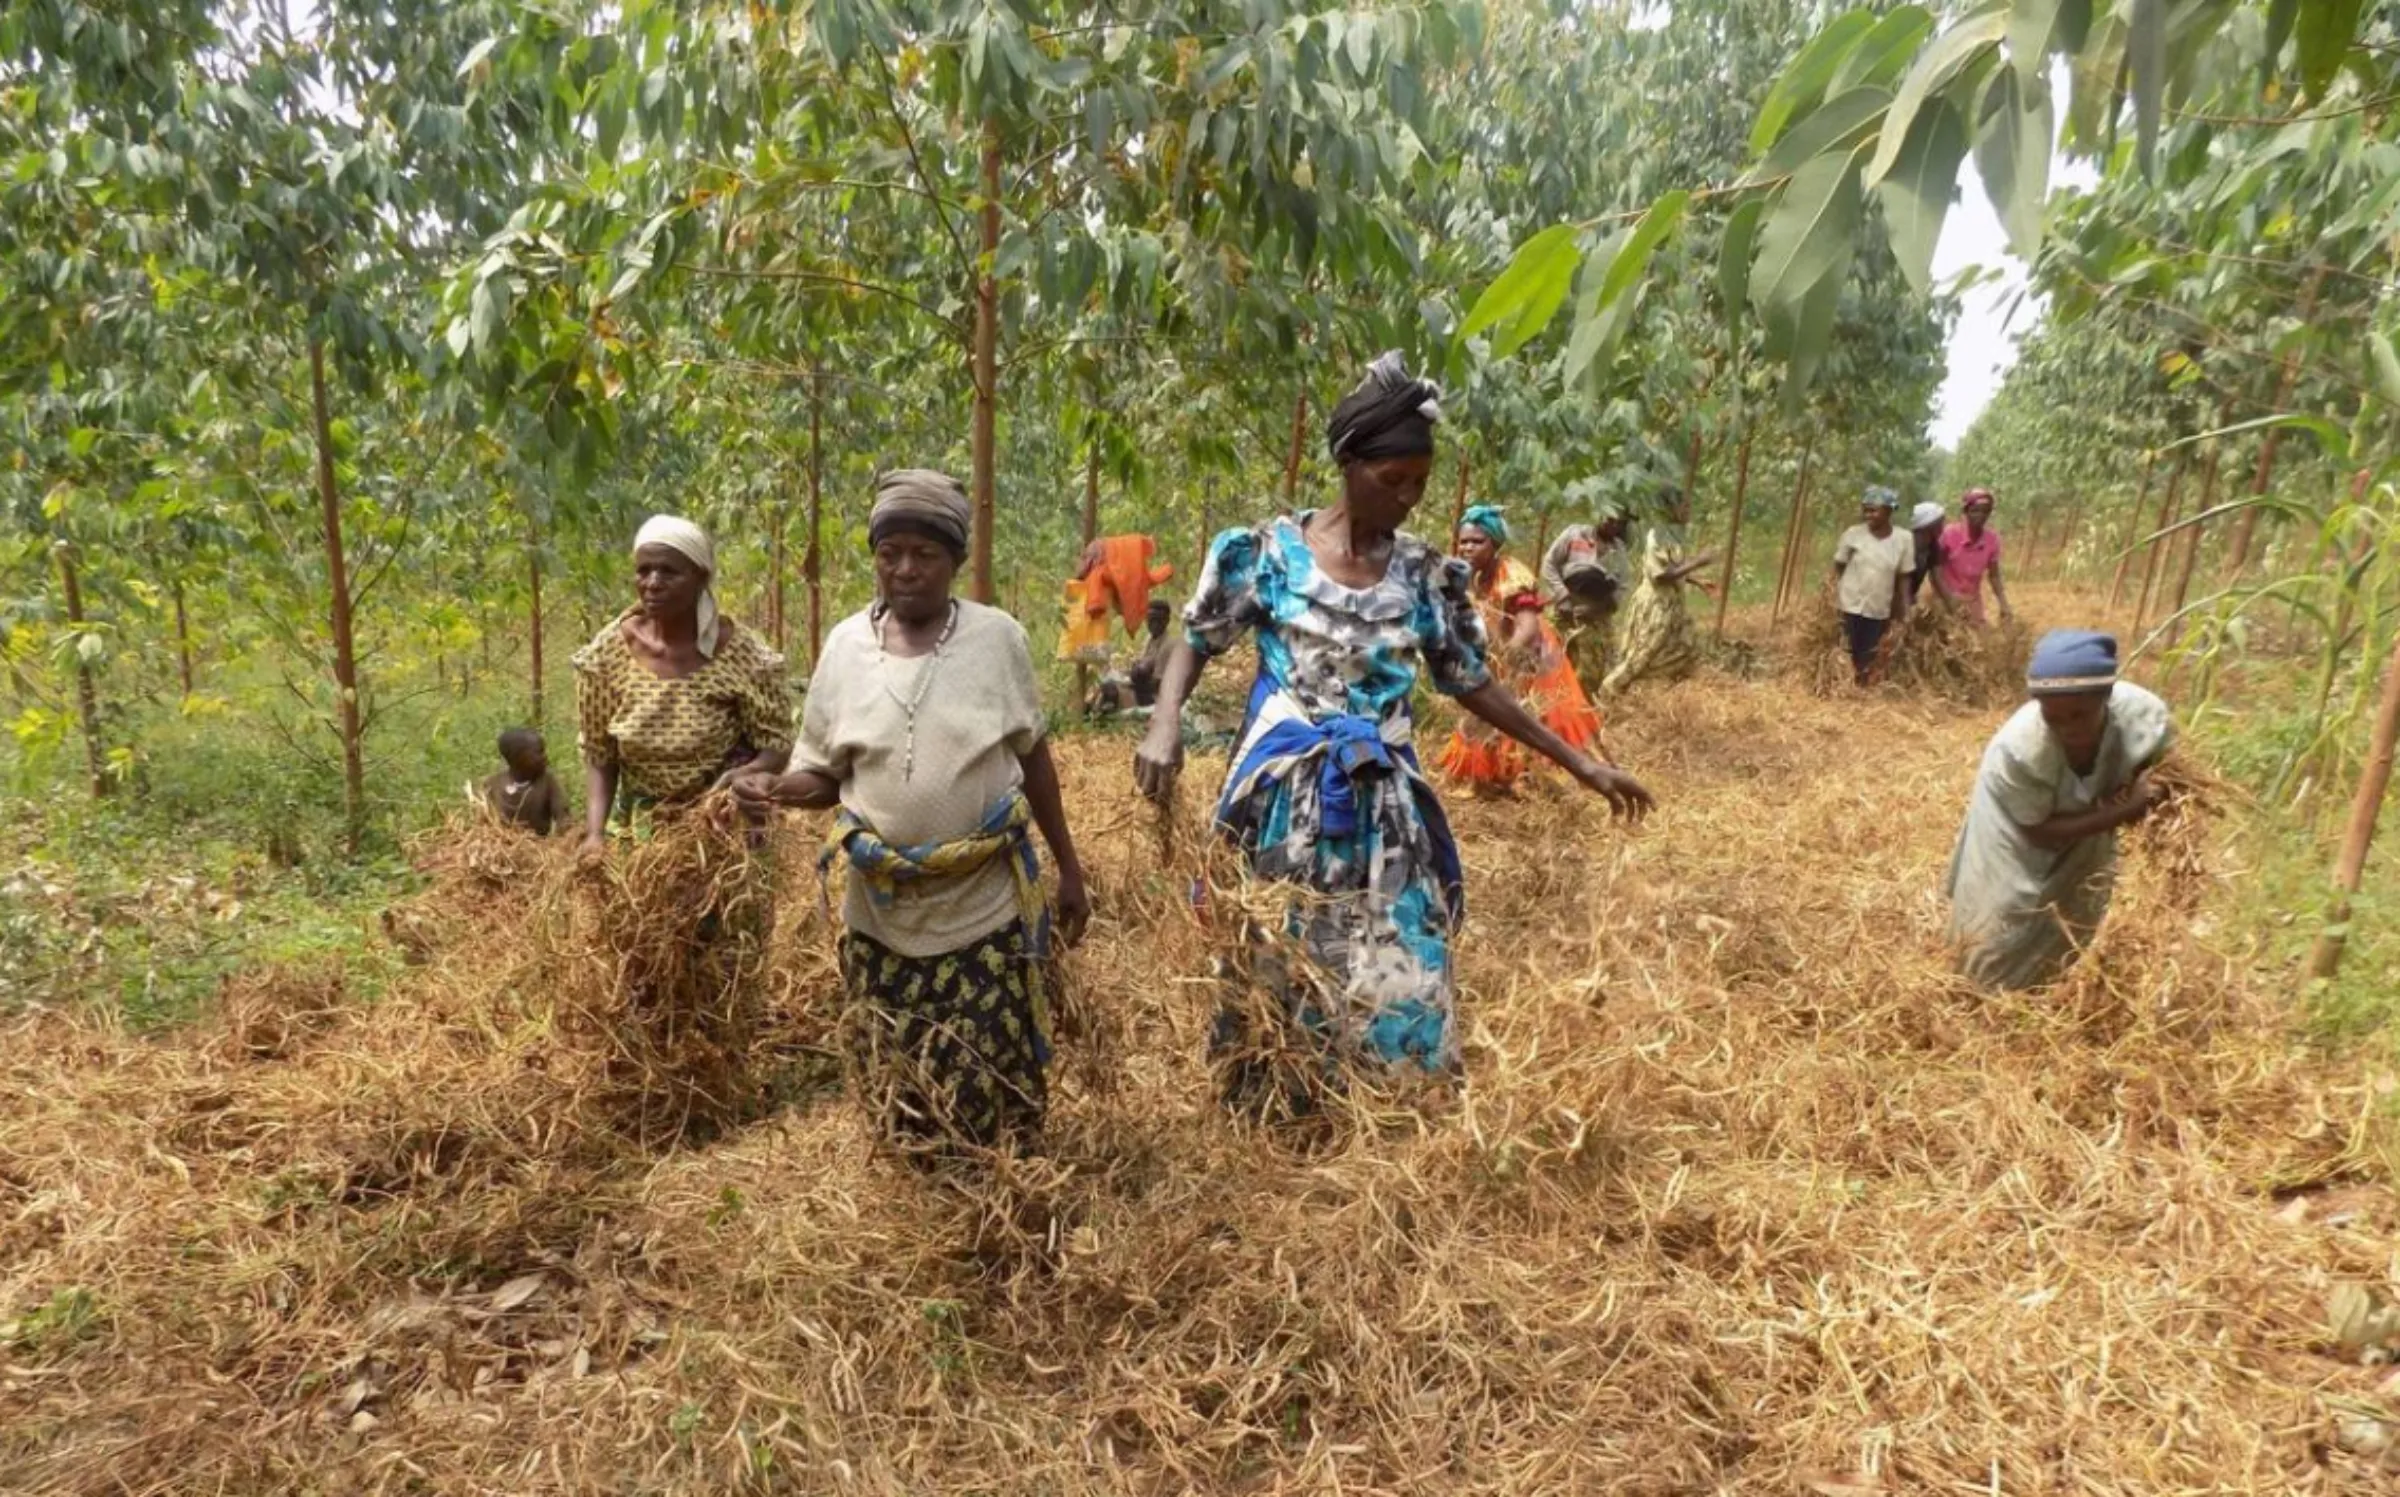 Women drying their beans on a tree plantation owned by Peter Kasenene in Mawojo, central Uganda, June 24, 2019